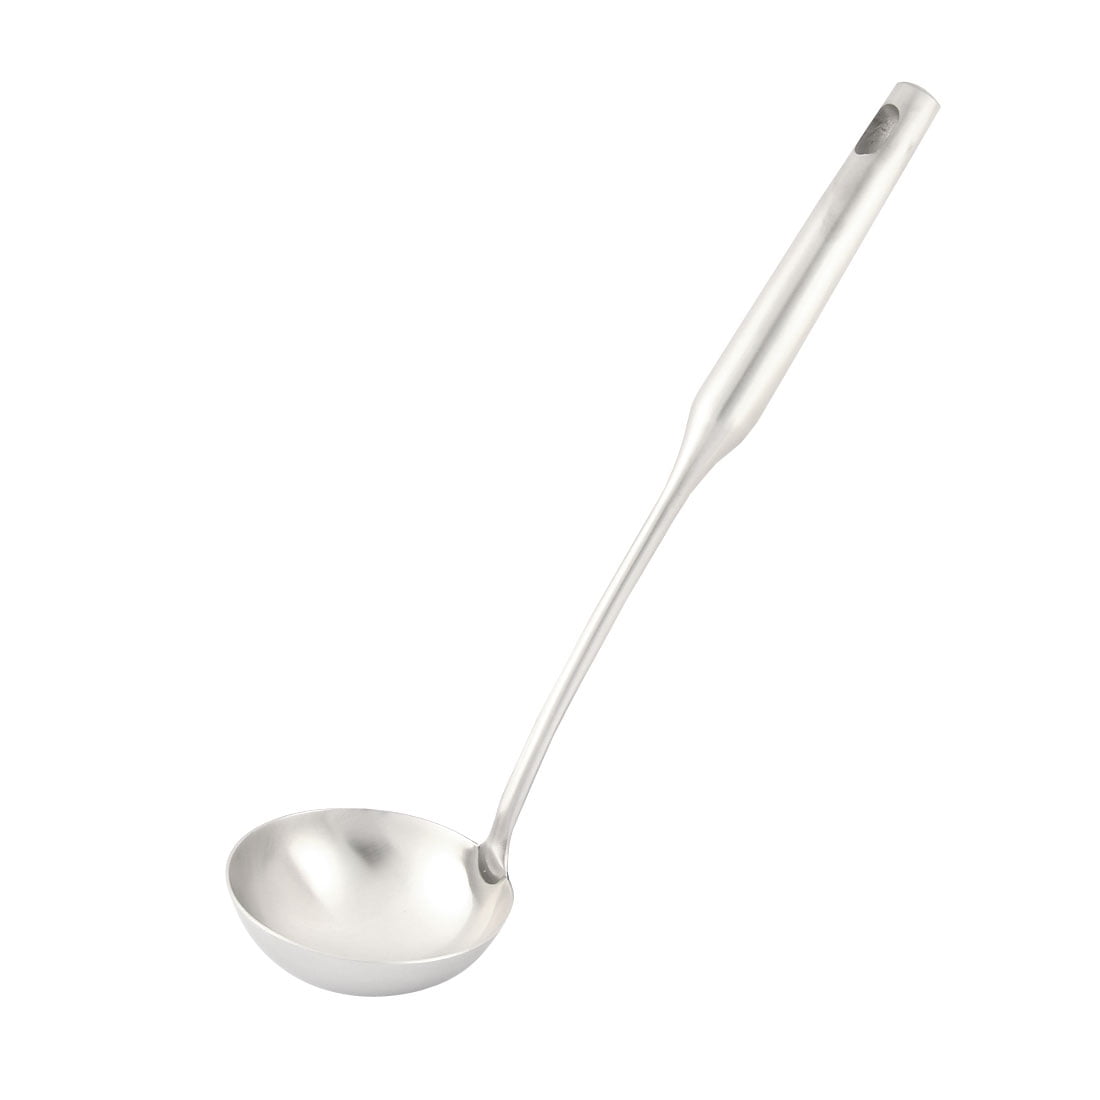 1 Pc Soup Spoon Long Handle Soft Food Serving Spoon for Home Restaurant Kitchen 